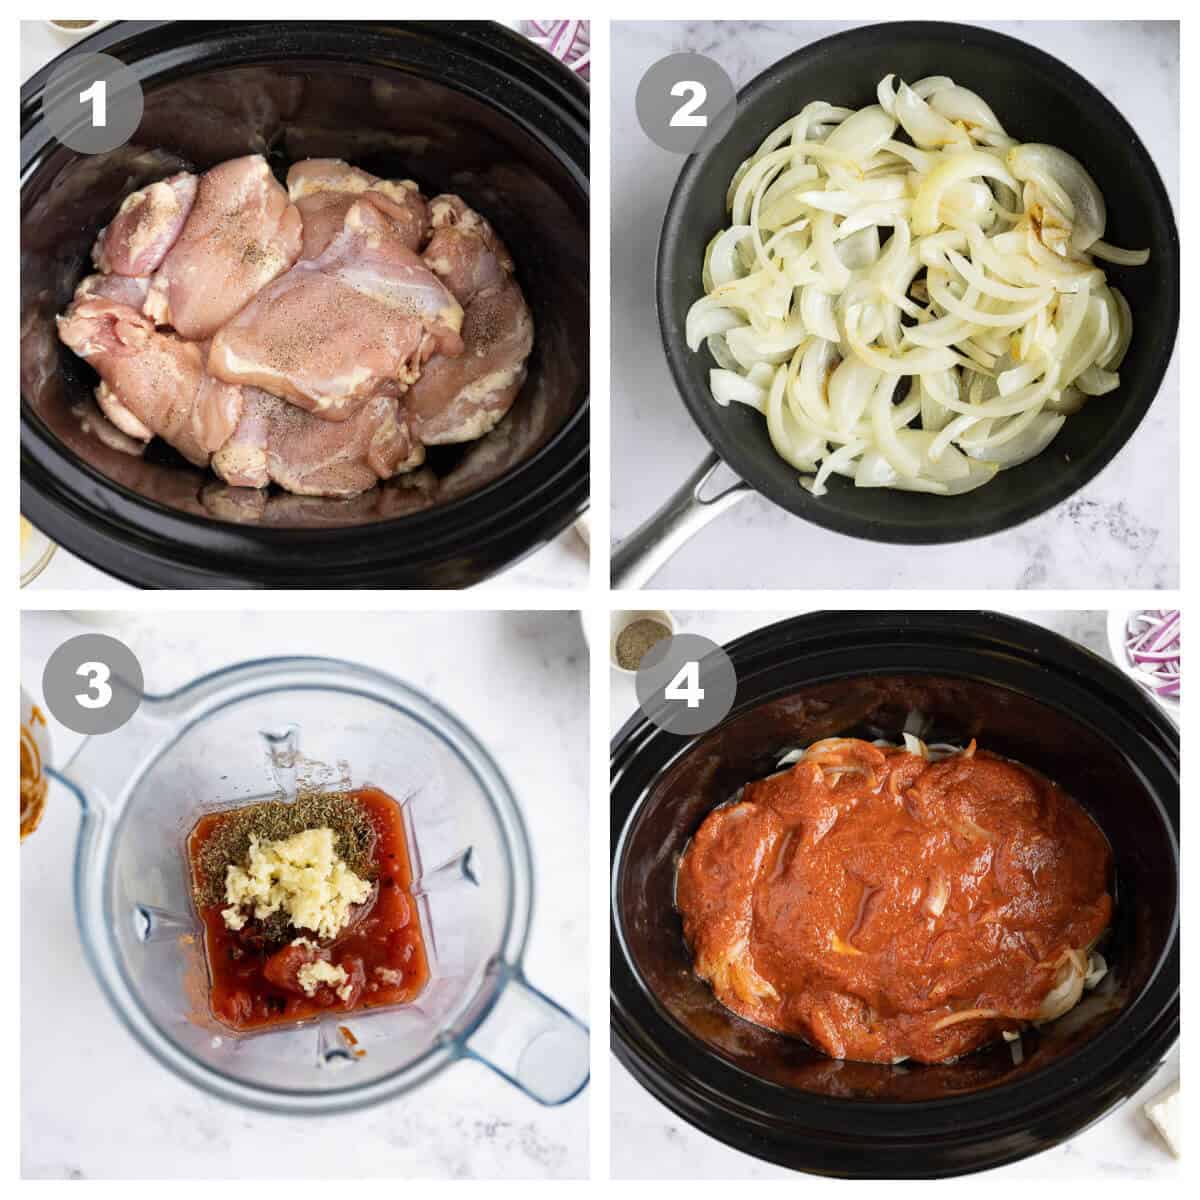 collage of 4 photos showing steps of making slow cooker chicken tinga, 1-chicken in crockpot; 2-sauteed onions; 3-tomatoes, garlic, chipotle peppers, and spices in a blender; 4-chicken in crockpot topped with sauteed onions and blended sauce